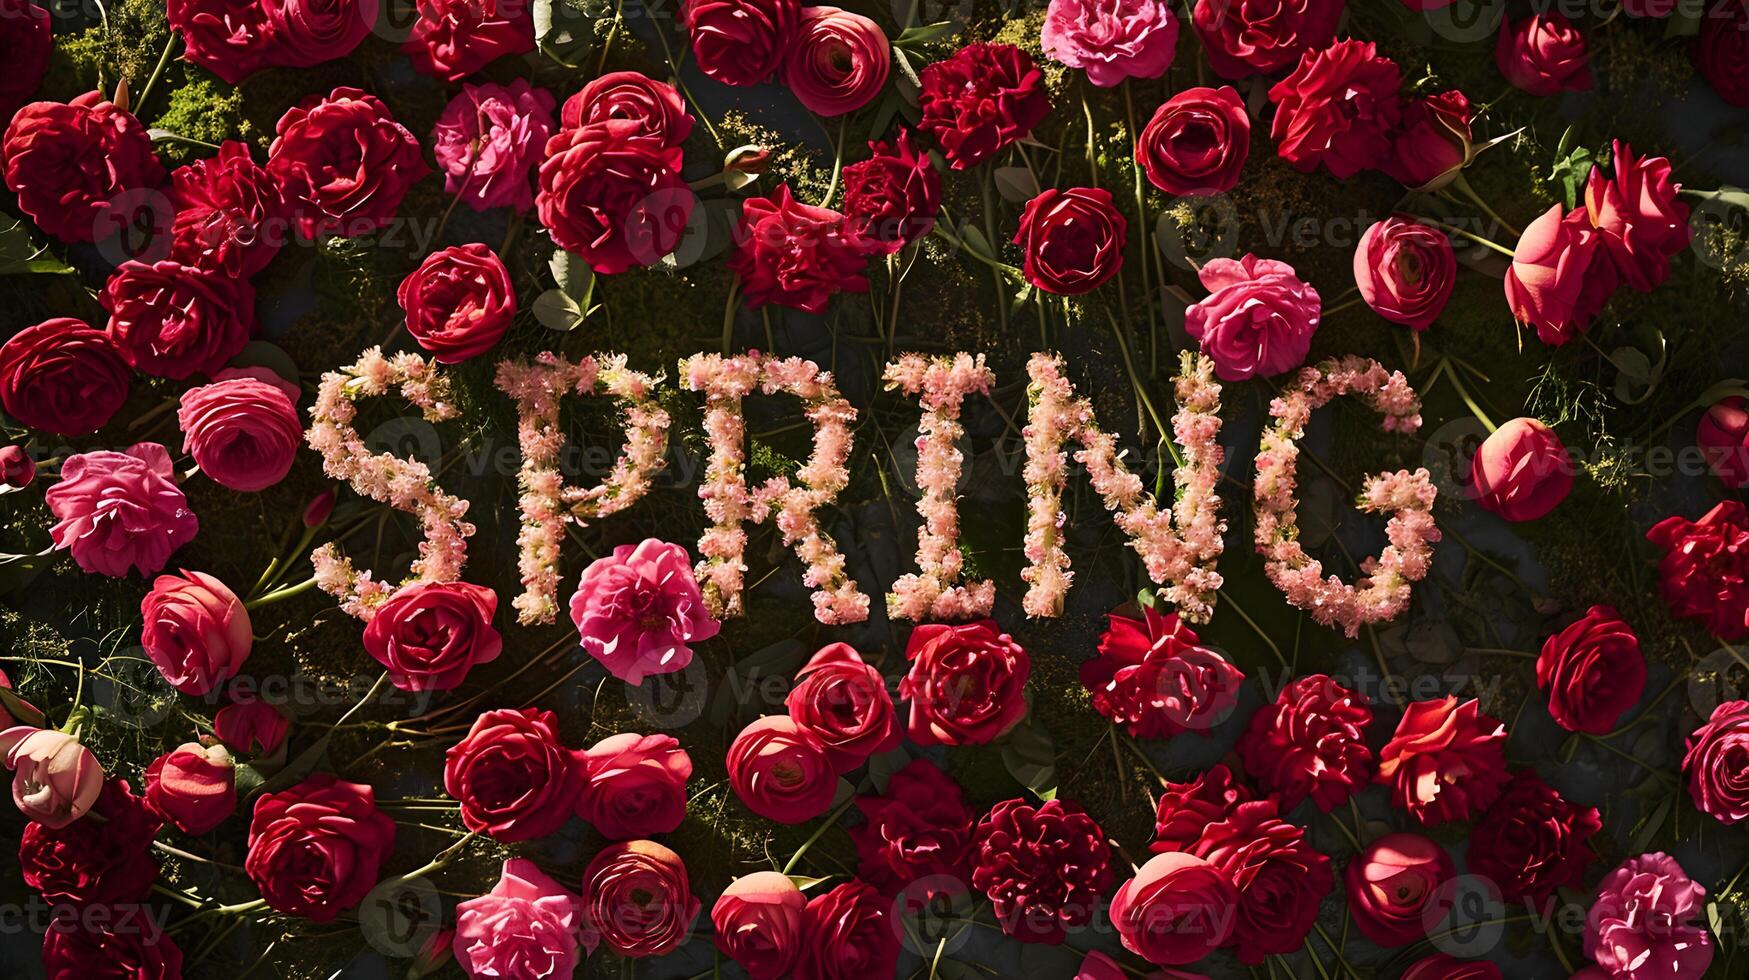 AI generated Spring text effect style with leaves and flowers for design Spring discount sale post photo